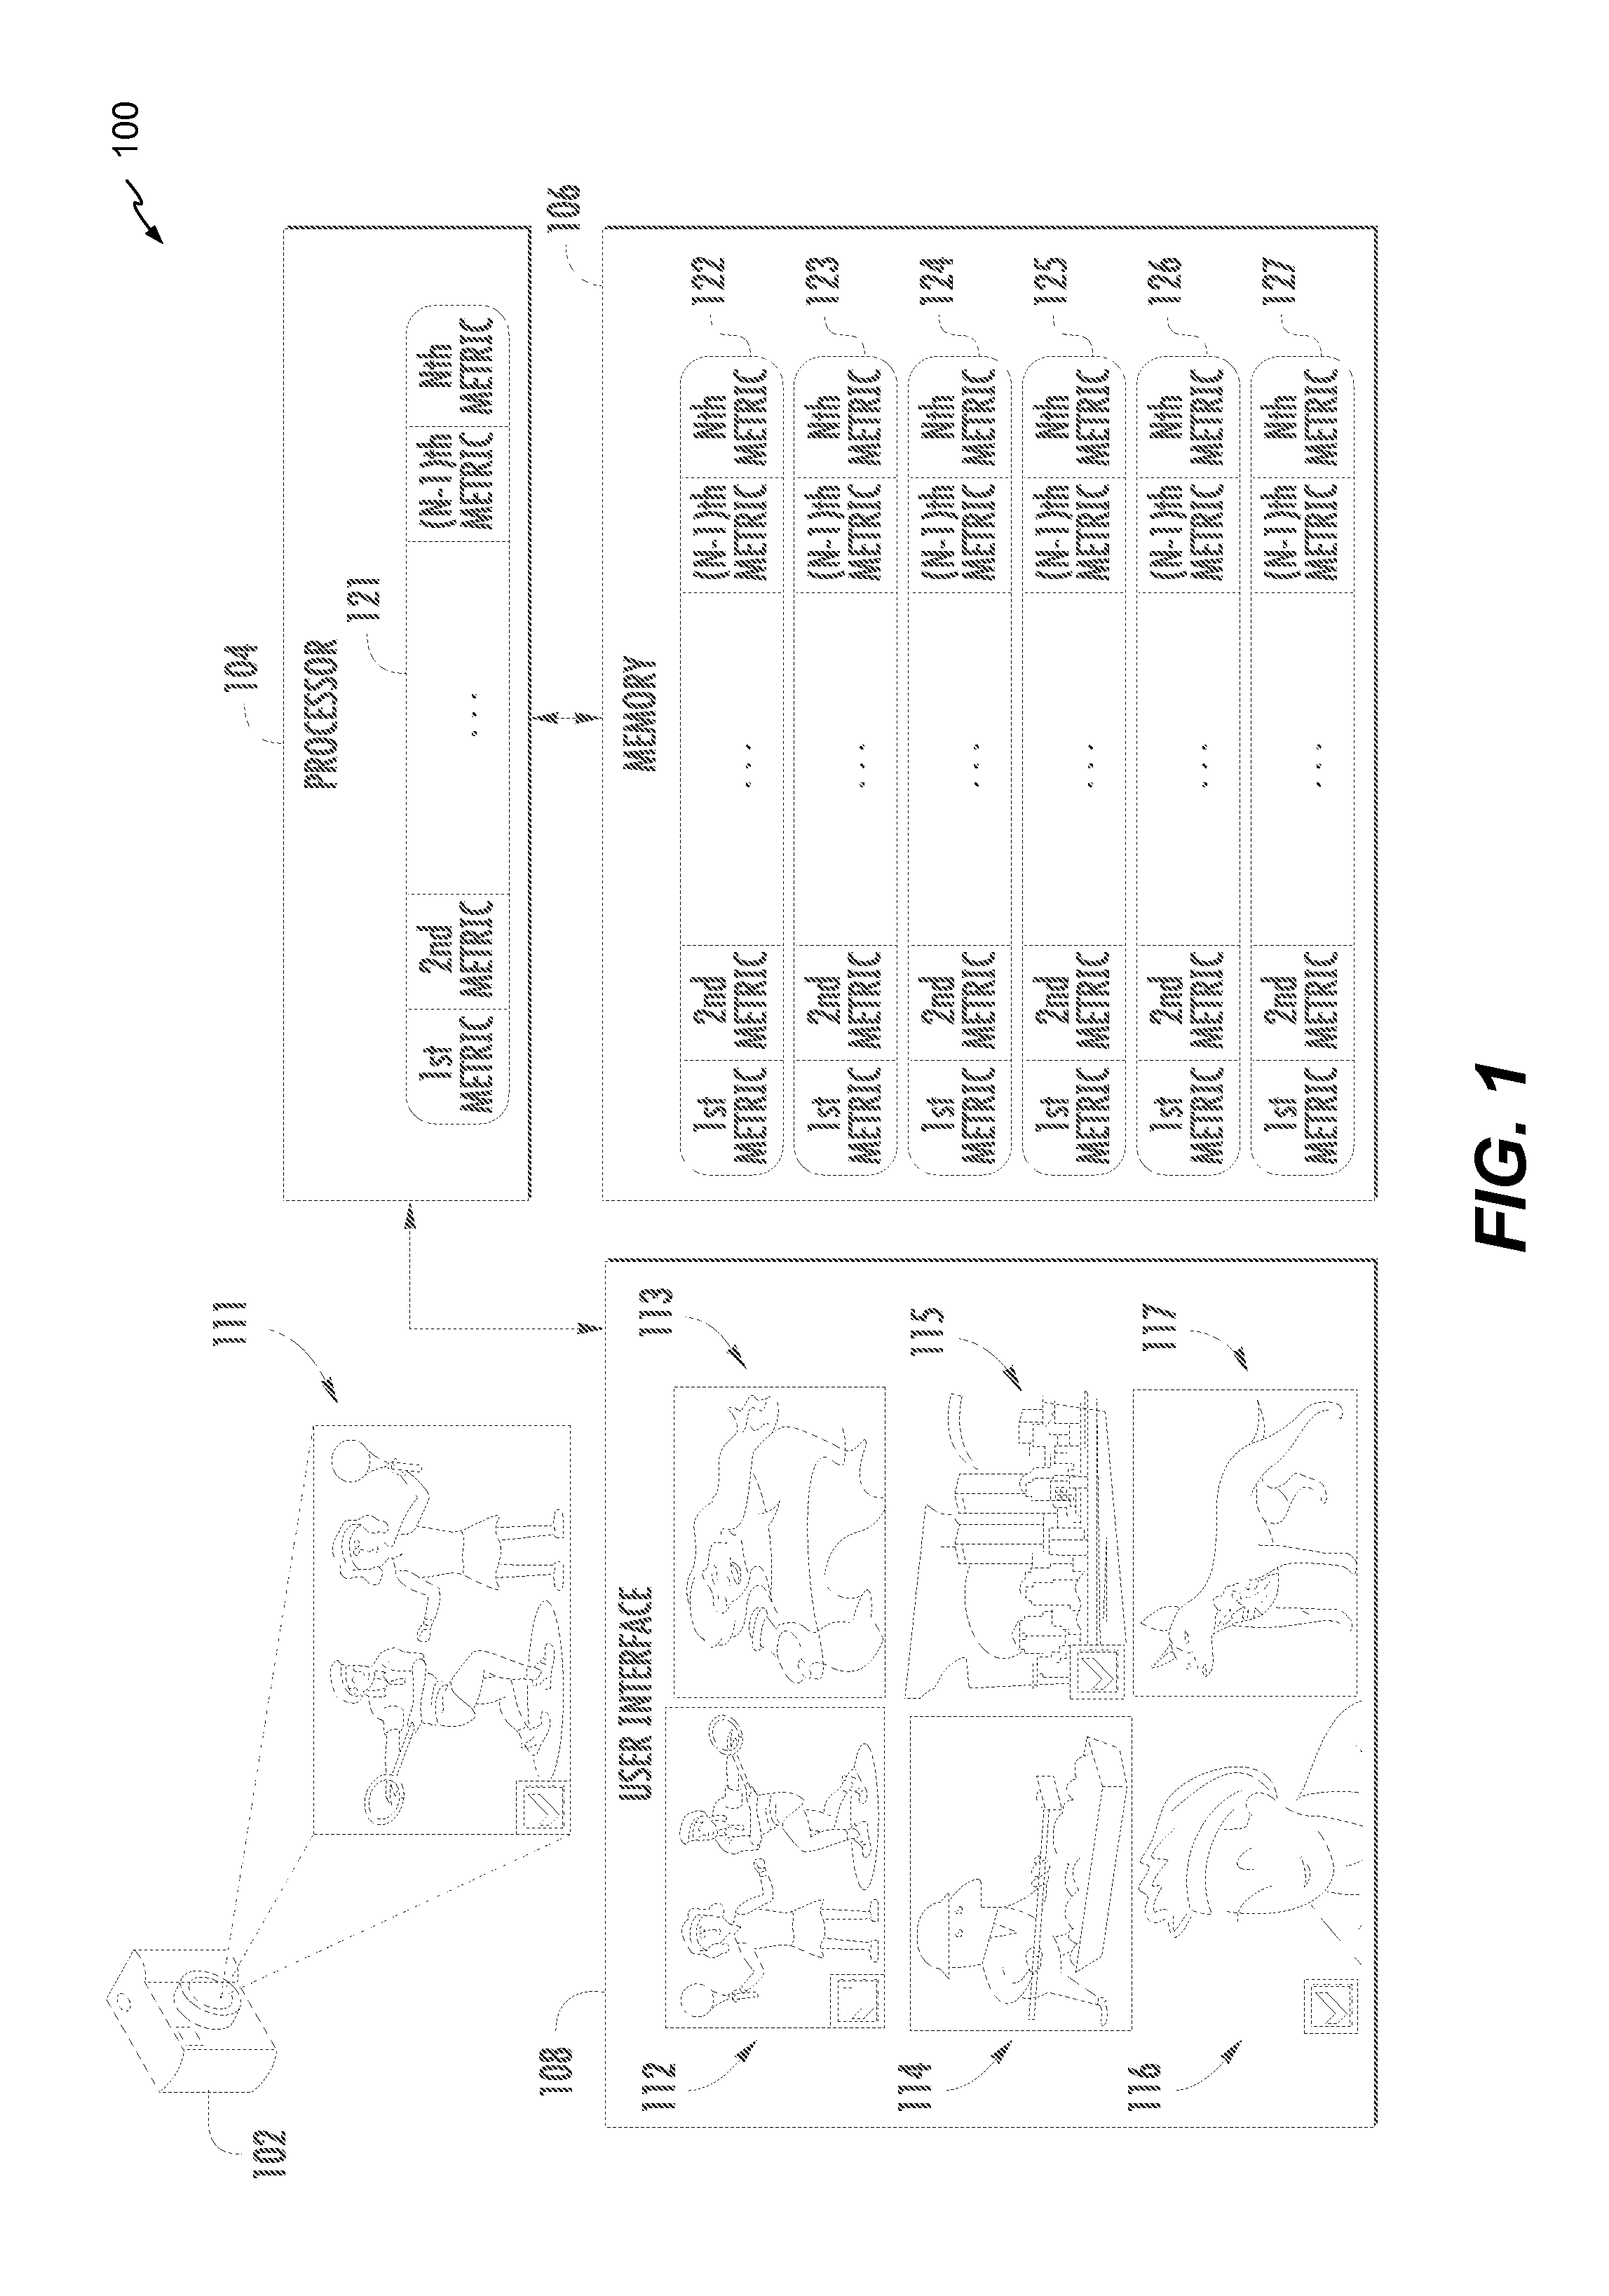 Systems and methods for selecting media items